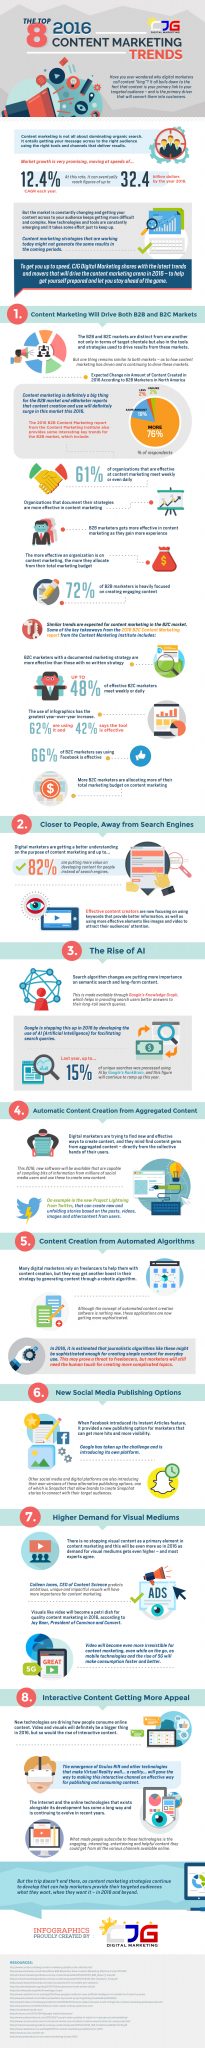 The Top 8 2016 Content Marketing Trends